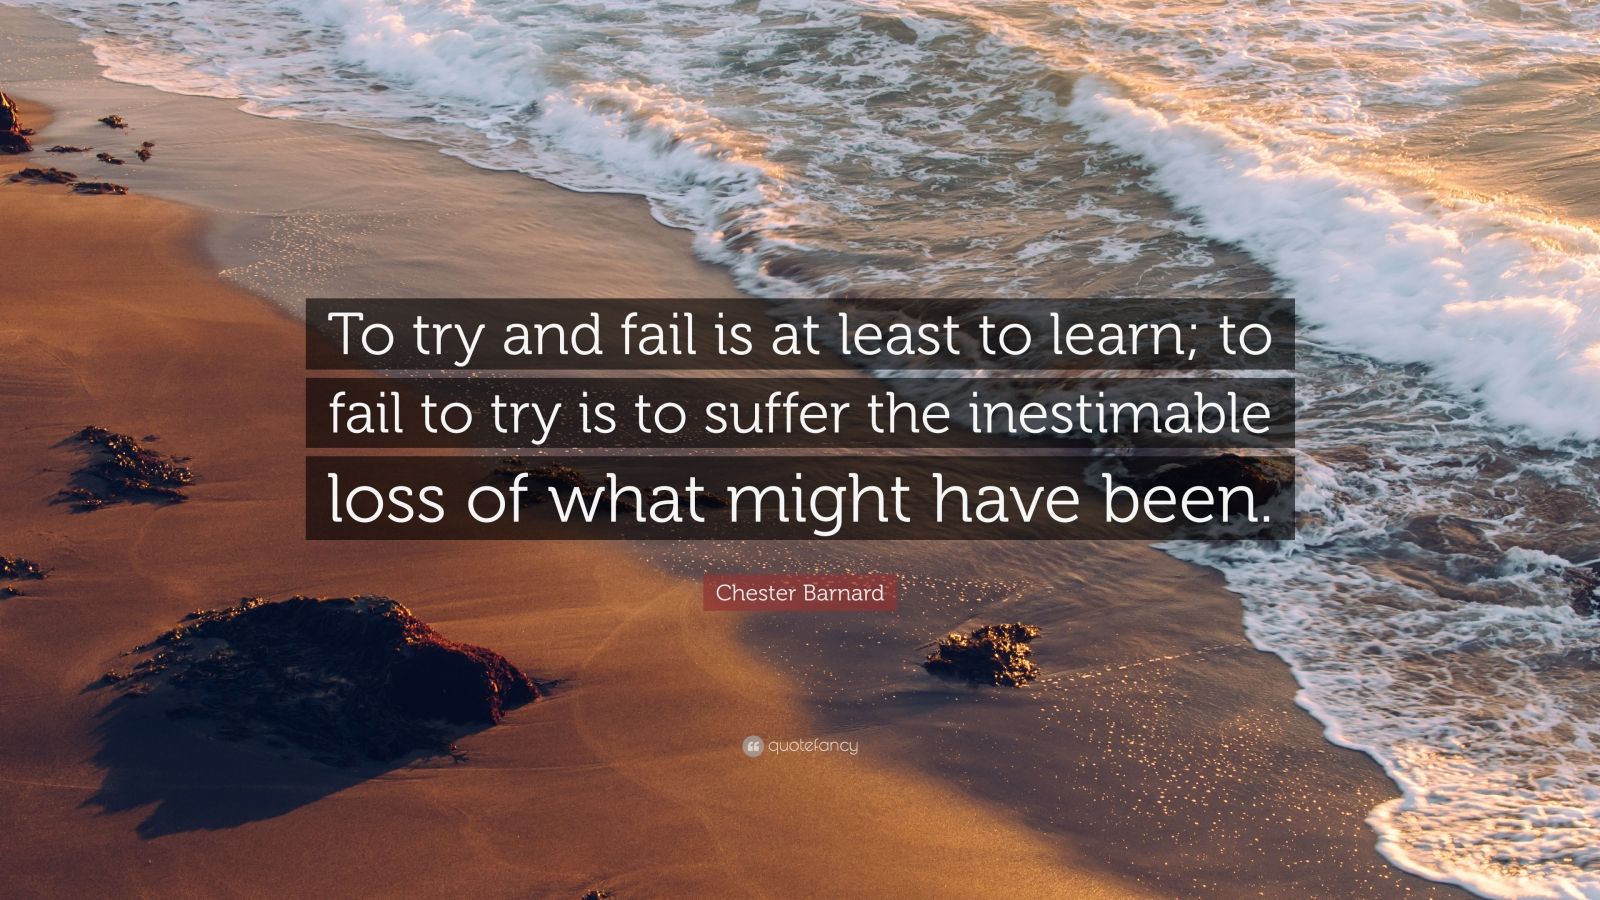 Chester Barnard Quote: “To try and fail is at least to learn; to fail ...